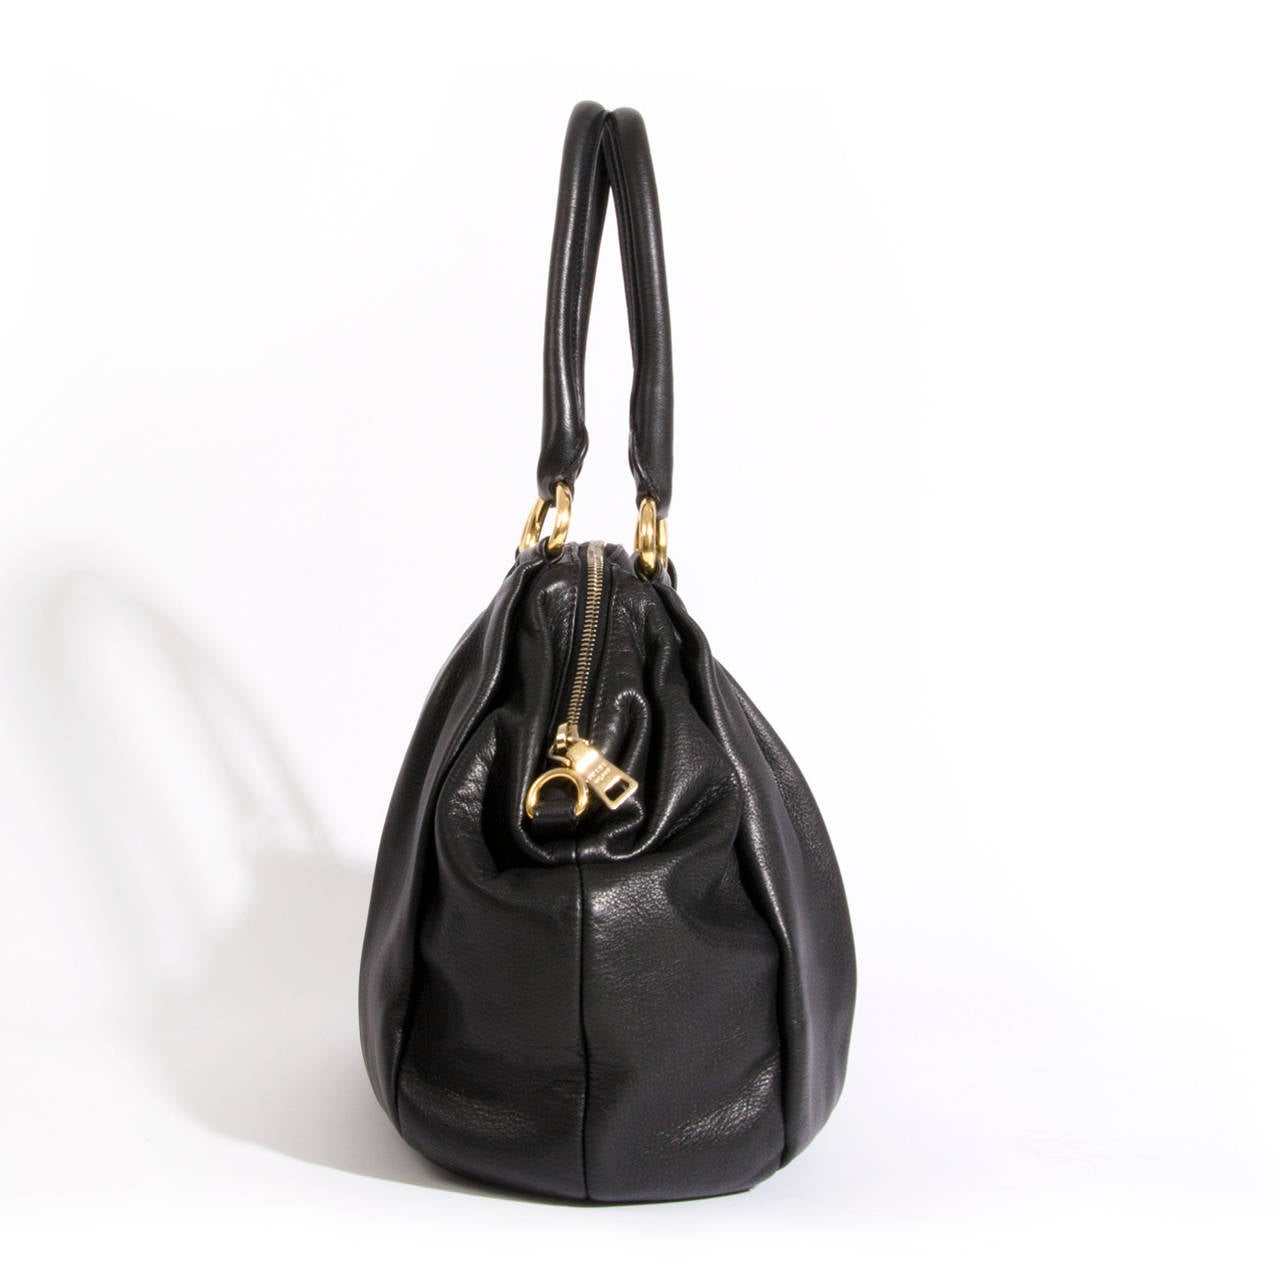 Prada black leather top handle bag with golden hardware, gold zipper closure. 
Black prada linning with one open pocket and one zipper pocket. 
Comes with dustbag.